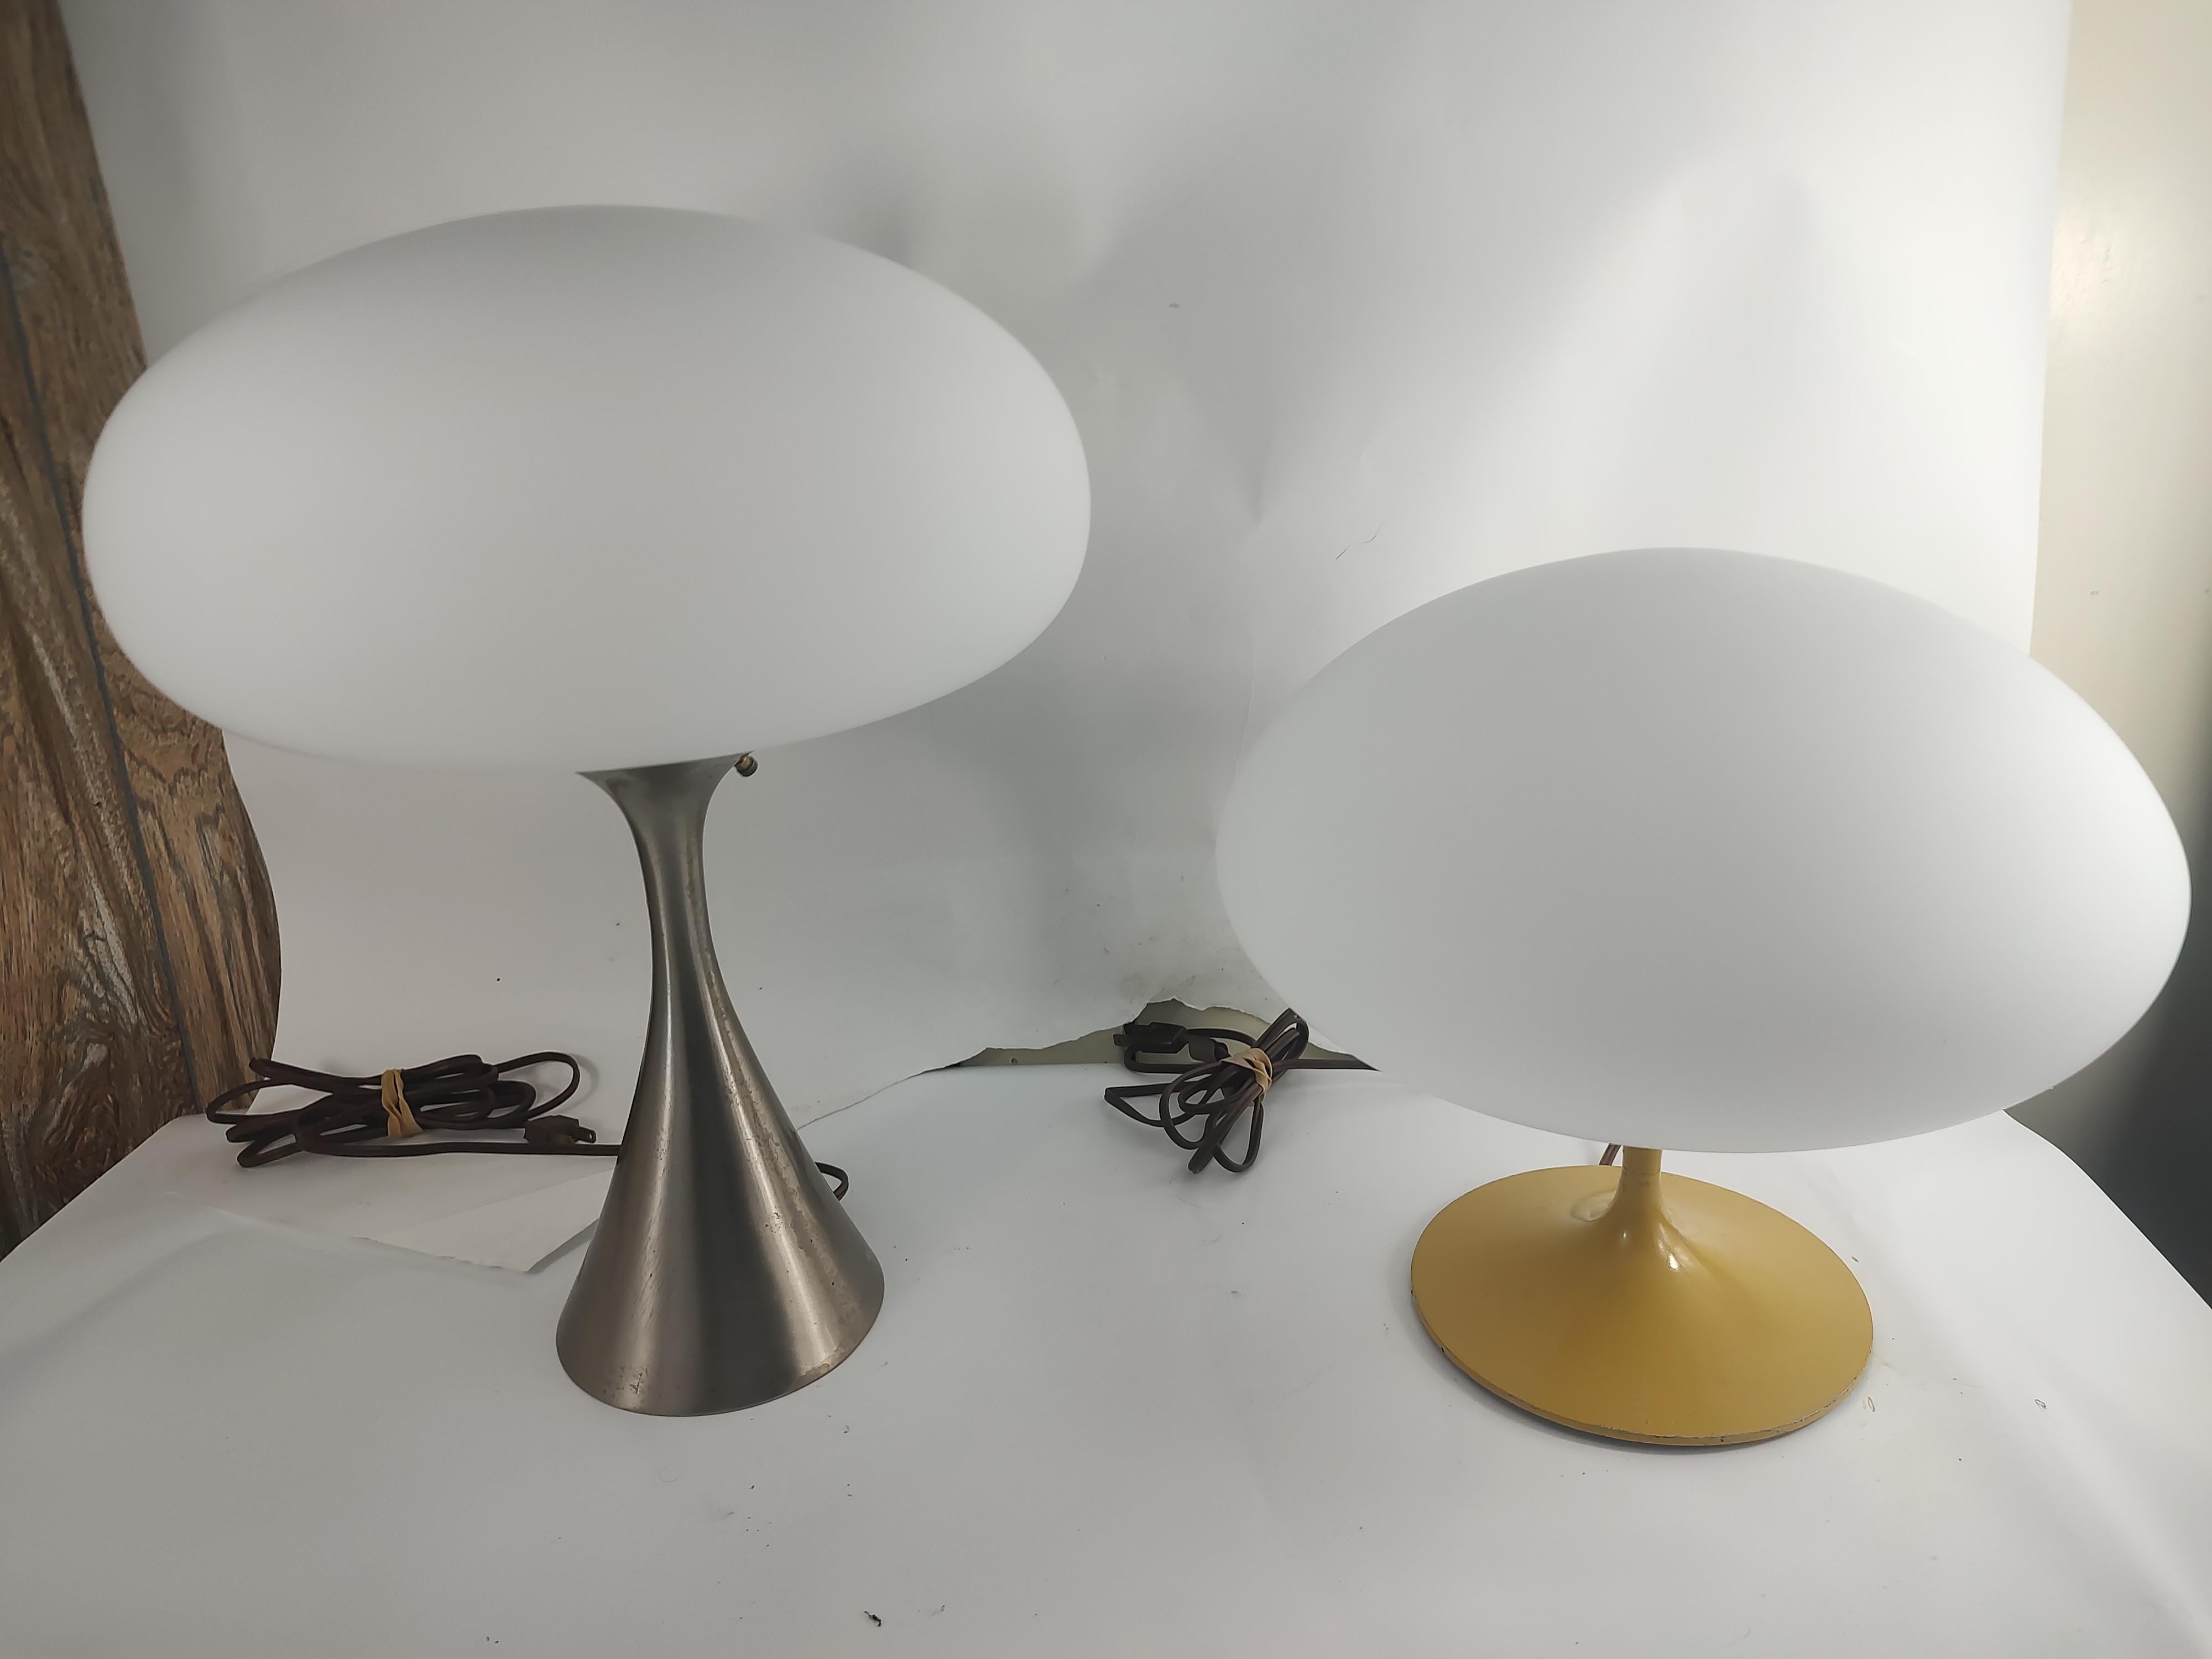 Mid Century Modern Sculptural Mushroom Table Lamps by Laurel Lamp Co. C1965 In Good Condition For Sale In Port Jervis, NY